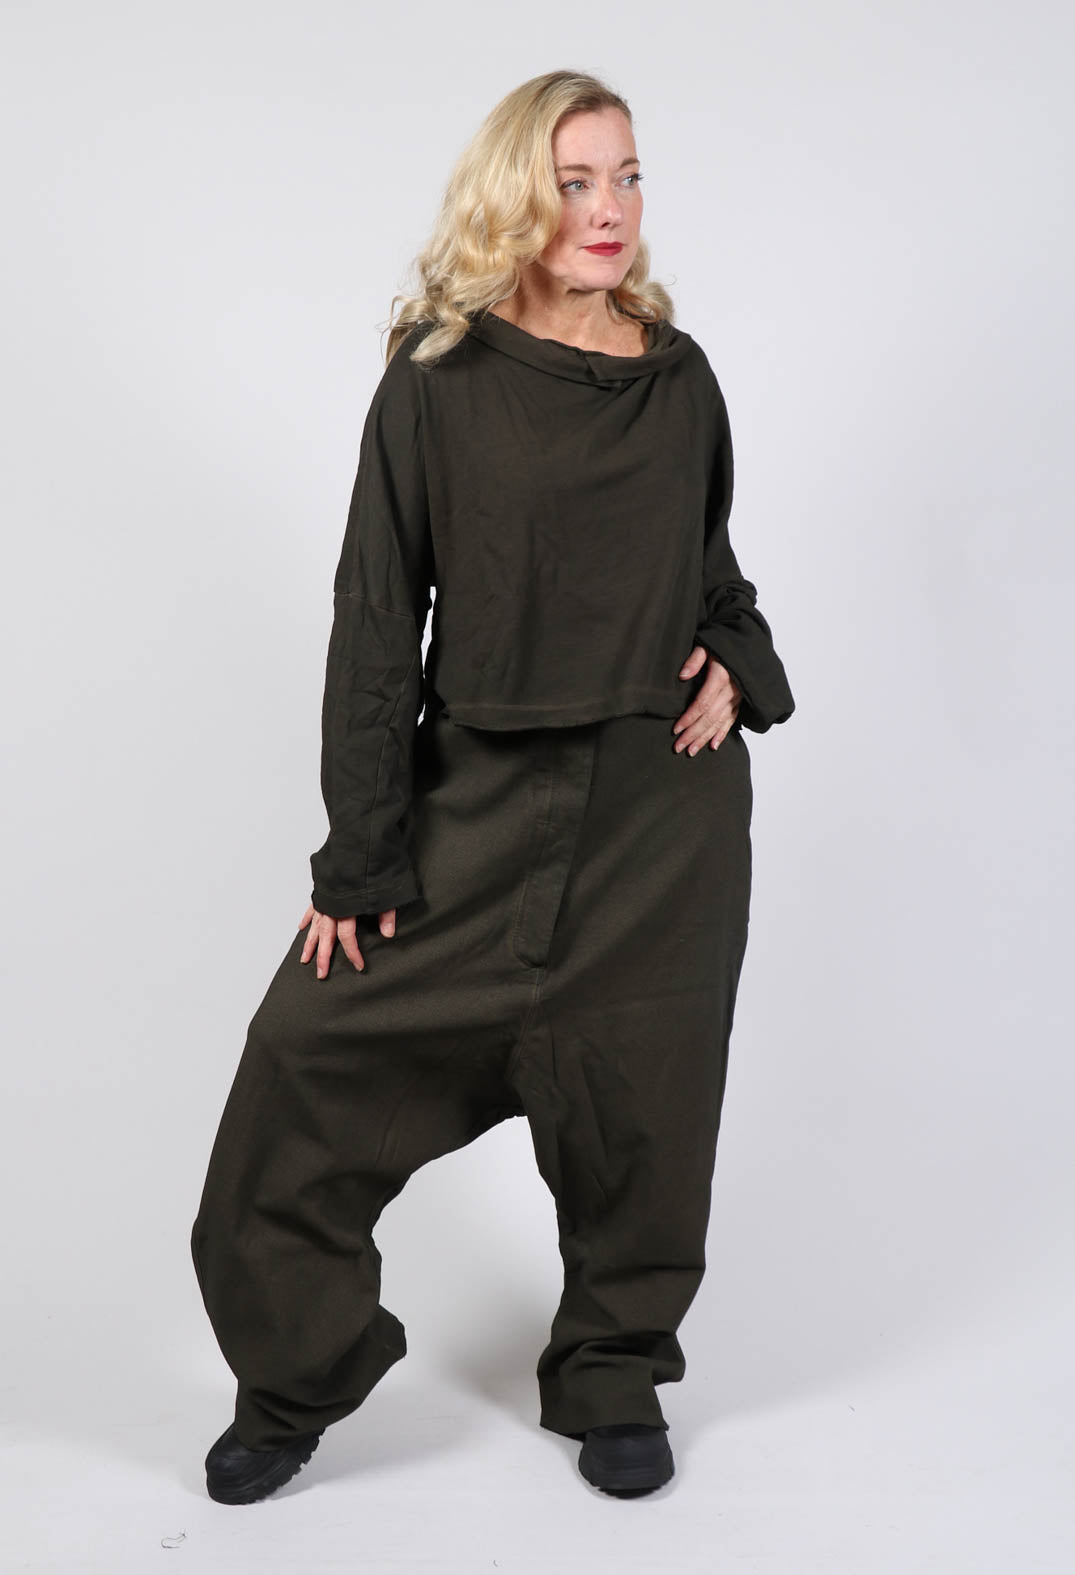 lady wearing a cropped black pullover and drop crotch trousers